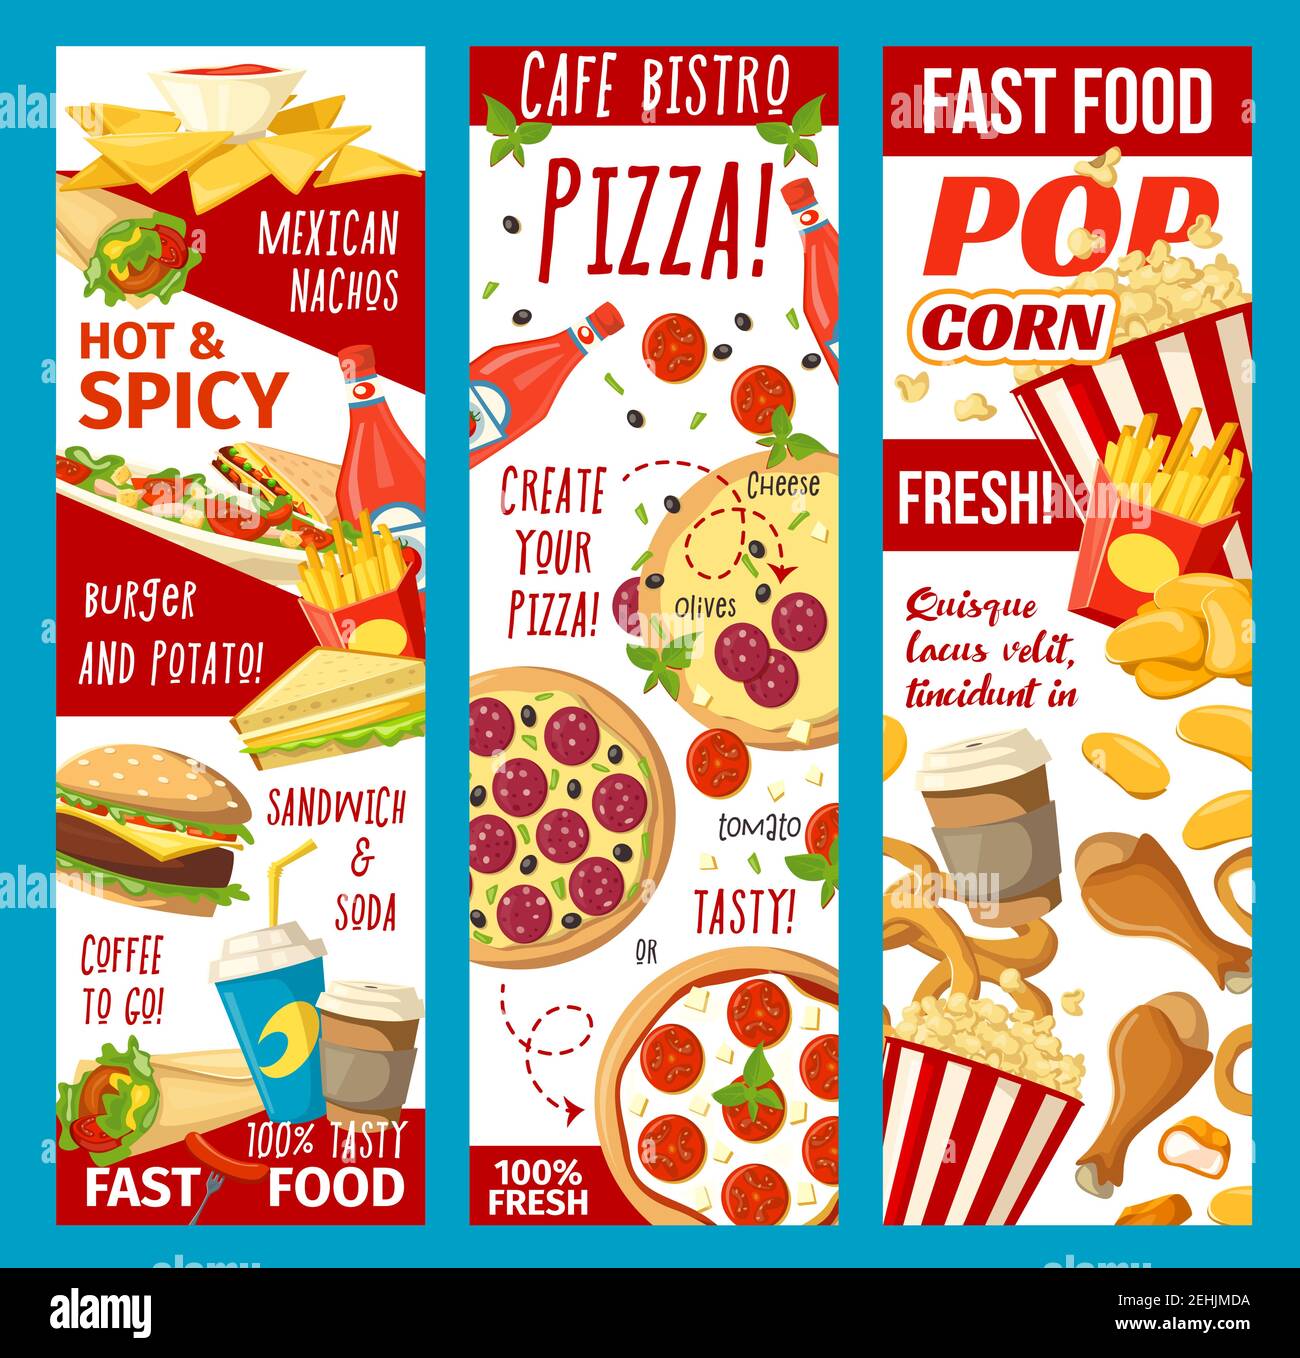 https://c8.alamy.com/comp/2EHJMDA/fast-food-banners-for-bistro-cafe-or-fastfood-restaurant-menu-vector-meals-combo-of-popcorn-hot-dog-sandwich-or-hamburger-and-cheeseburger-pizza-or-2EHJMDA.jpg